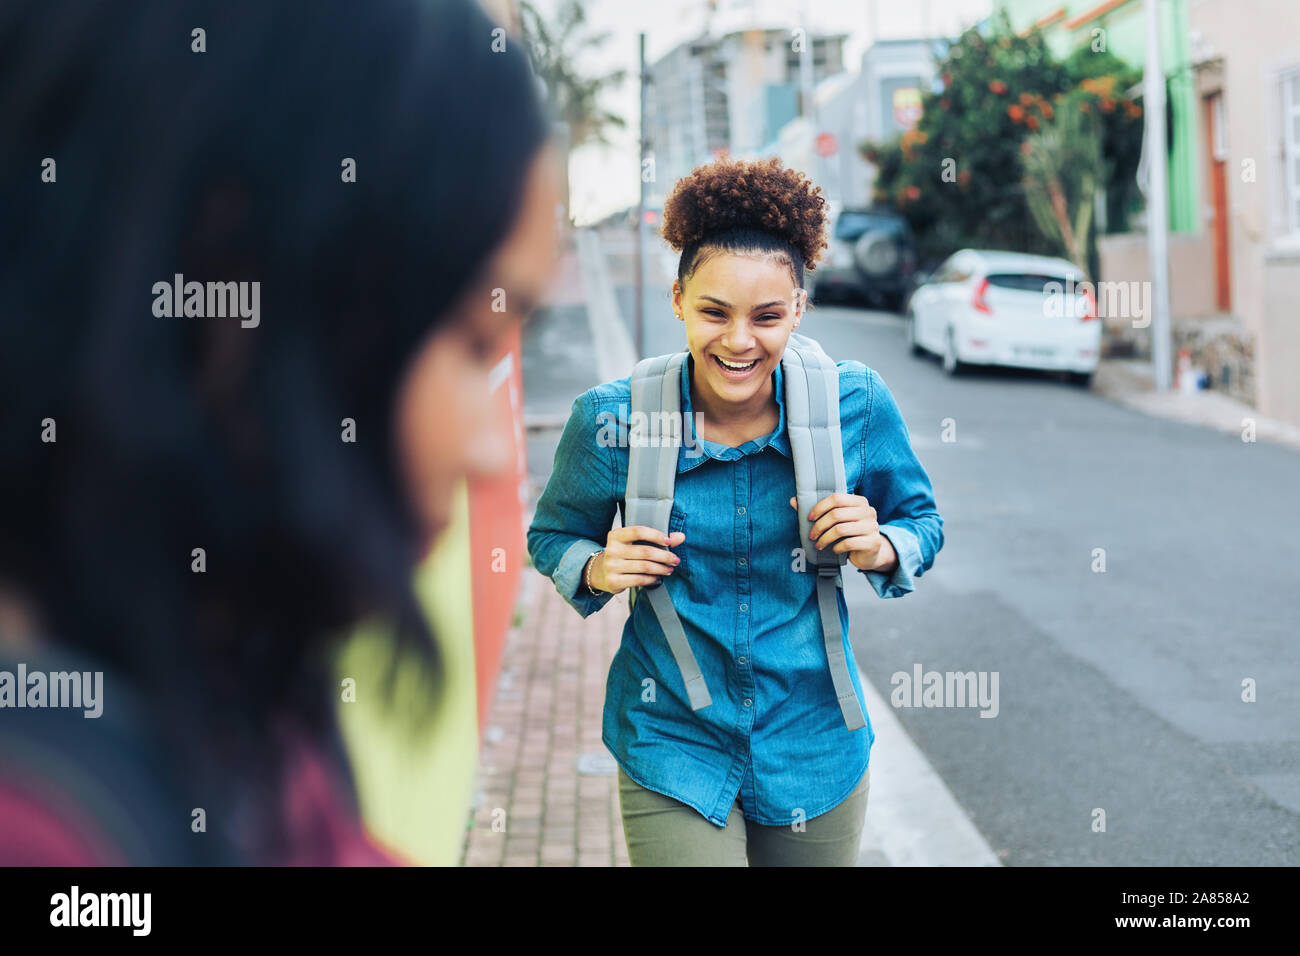 Laughing, happy young woman with backpack on sidewalk Stock Photo